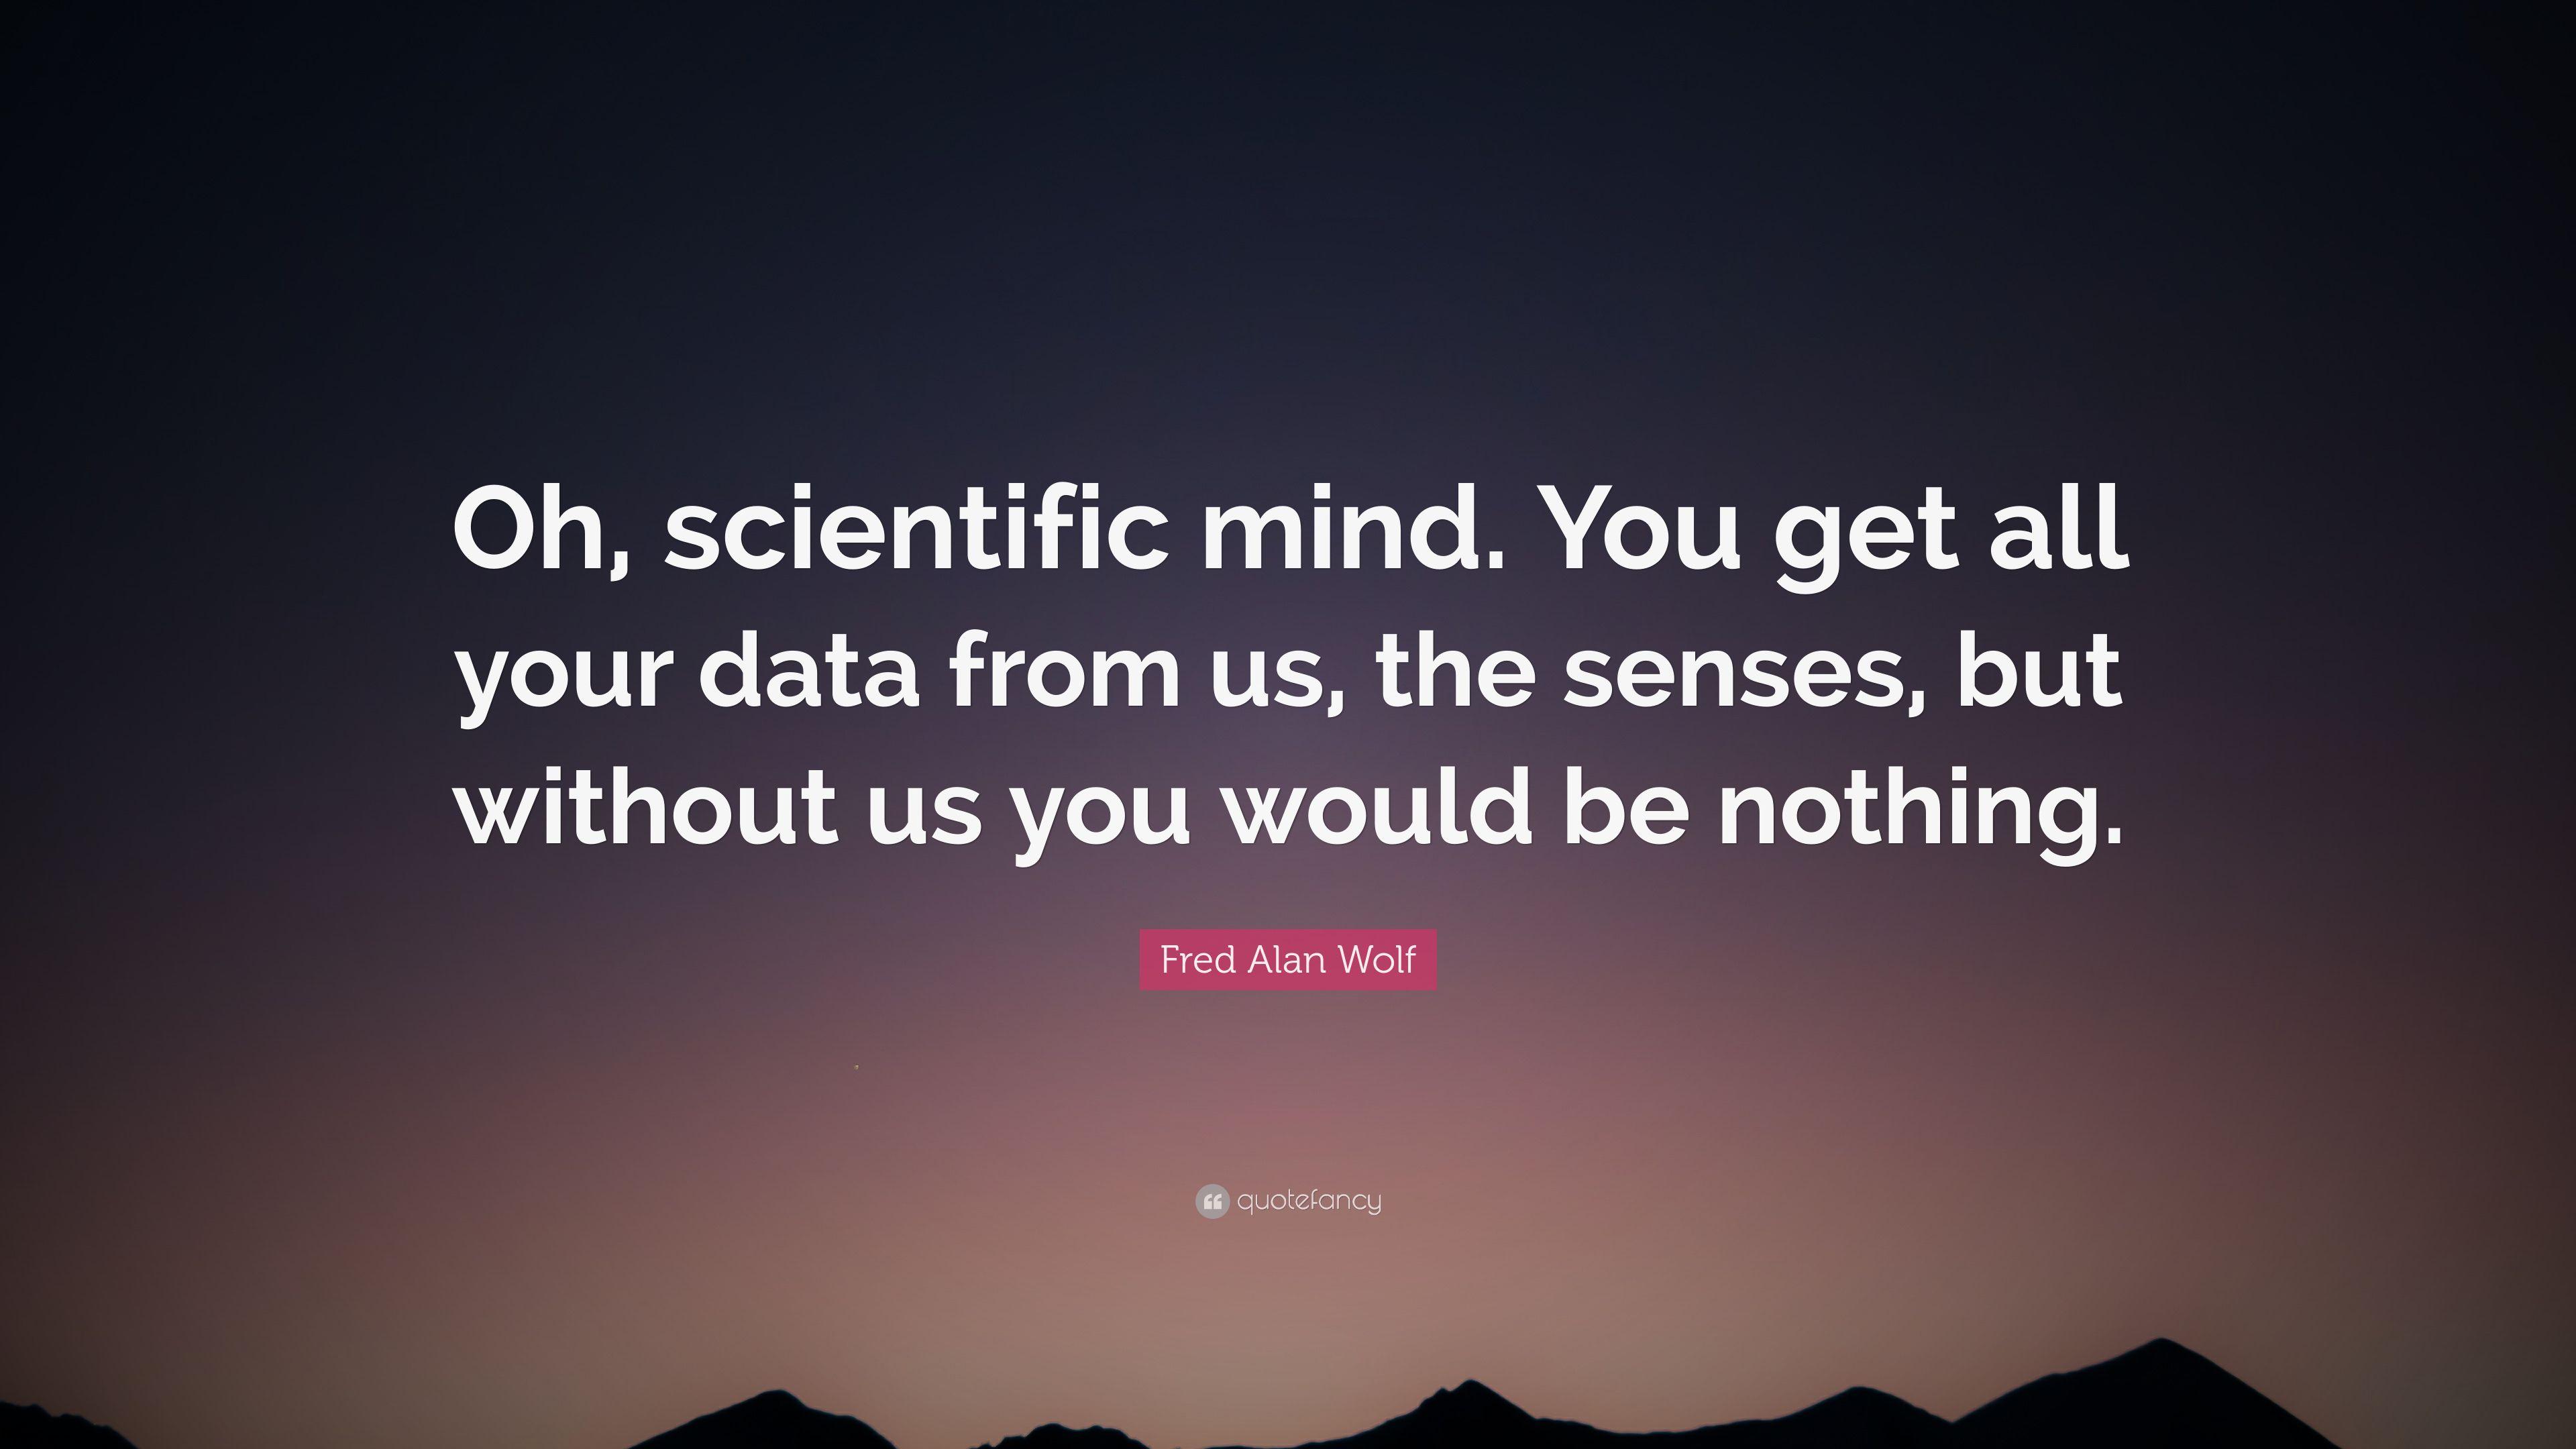 Fred Alan Wolf Quote: “Oh, scientific mind. You get all your data